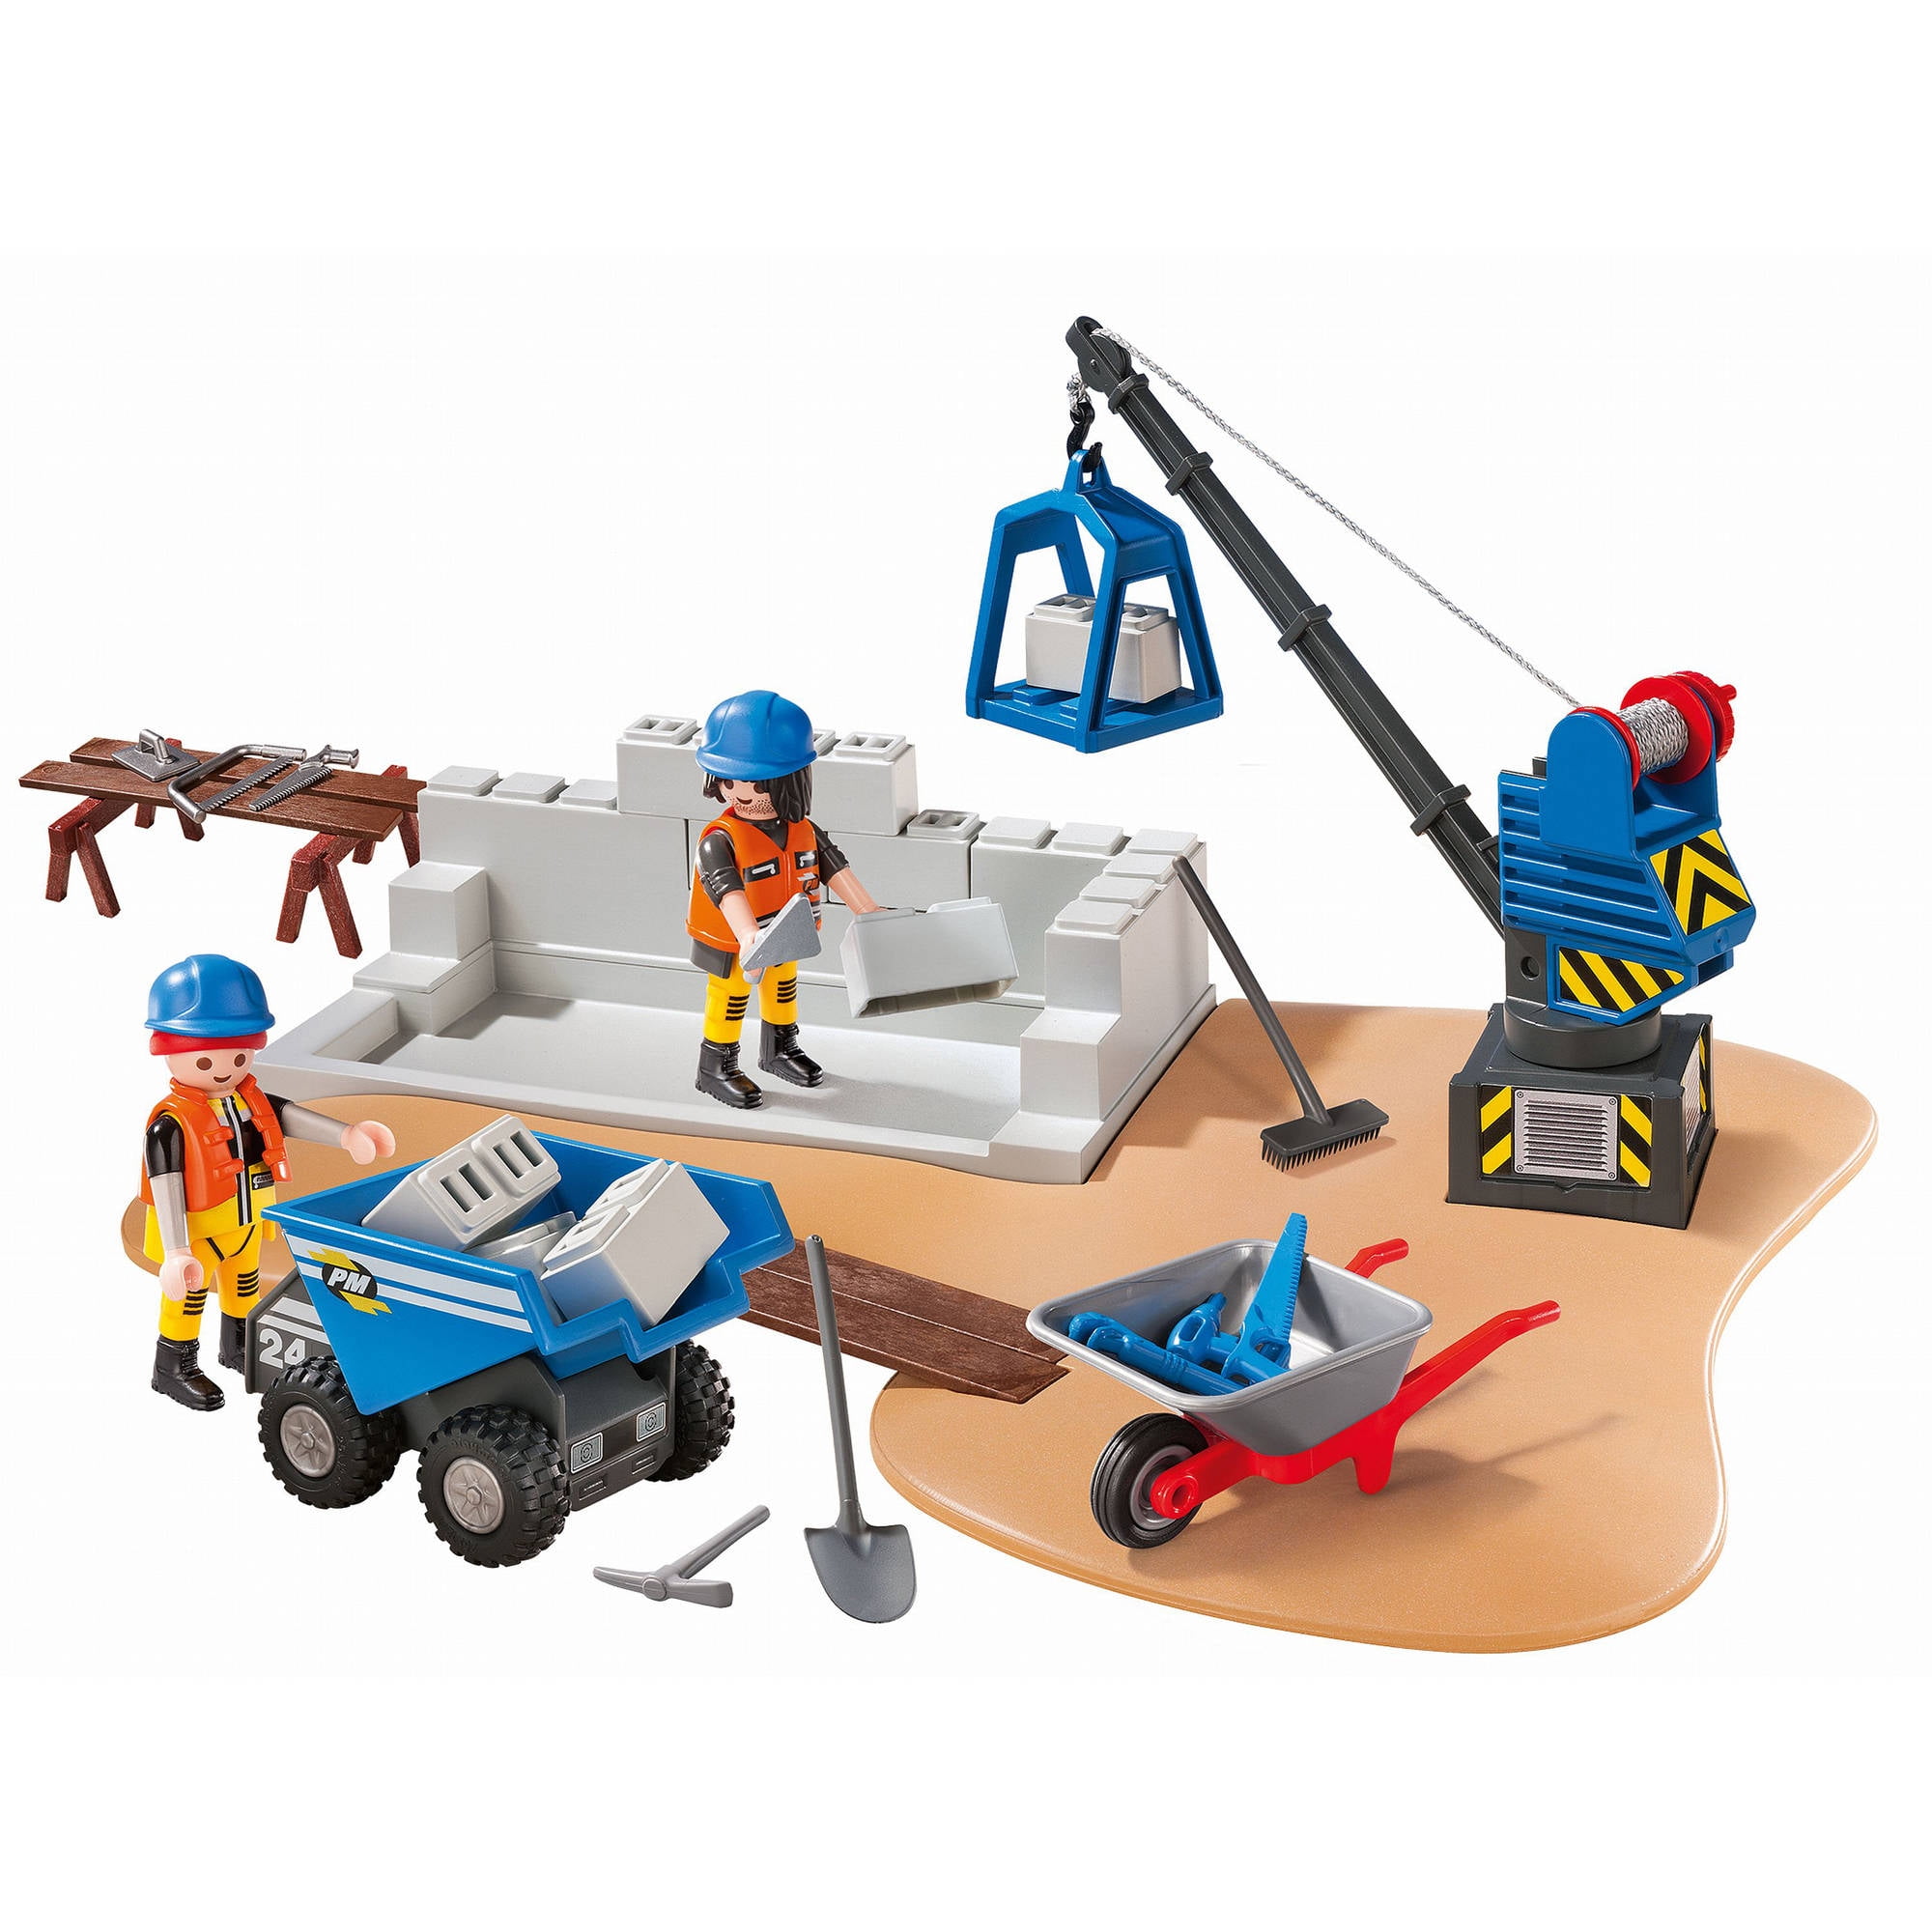 q1102 set of accessories & tools for cement Playmobil construction 